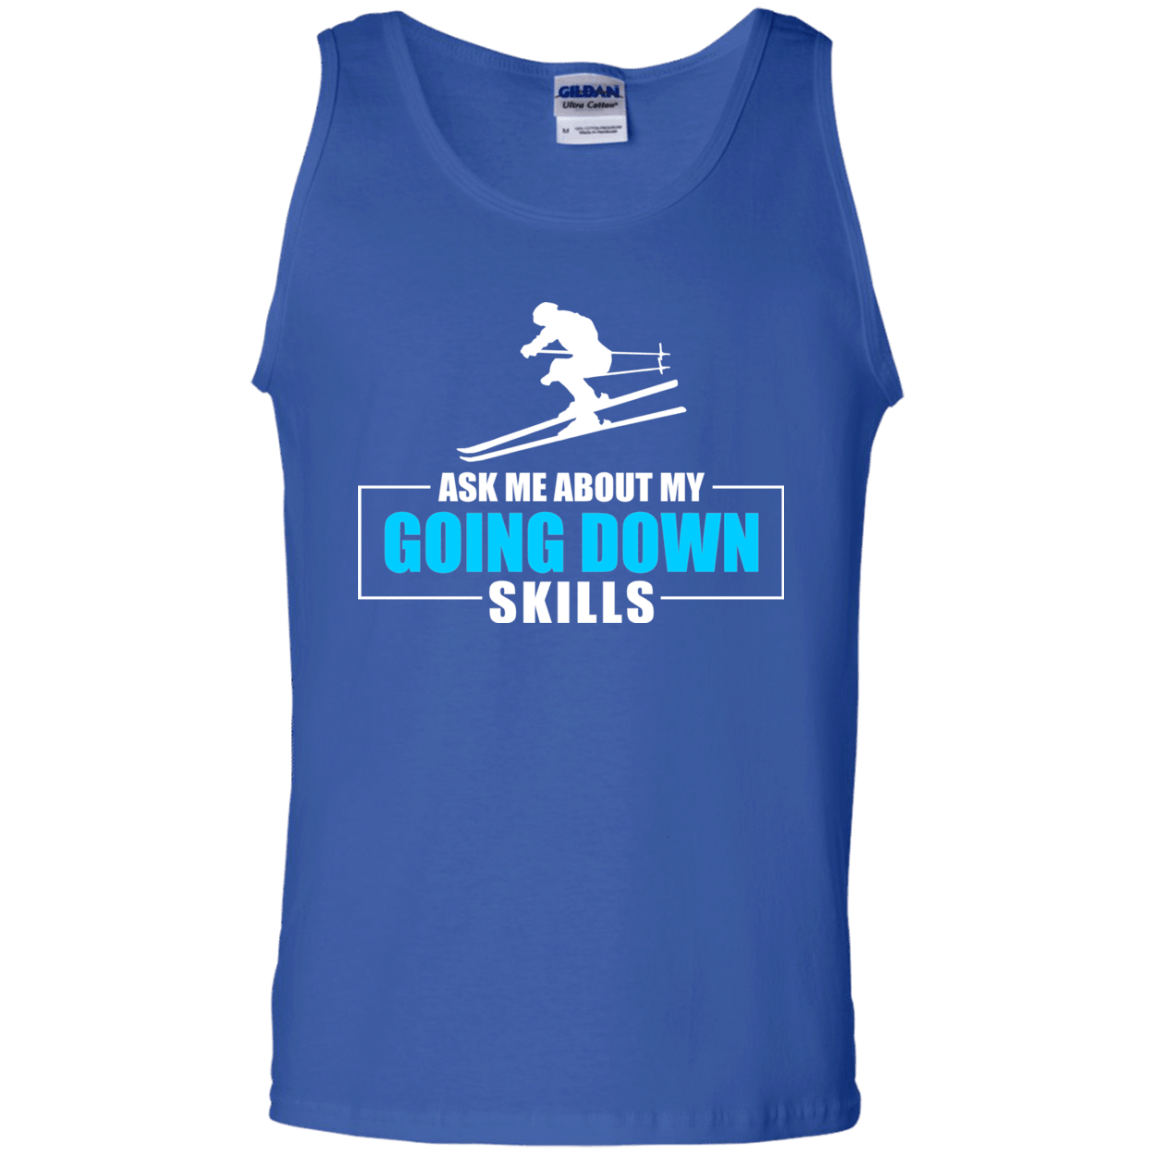 Ask Me About My Going Down Skills - Ski Tank Tops - Powderaddicts